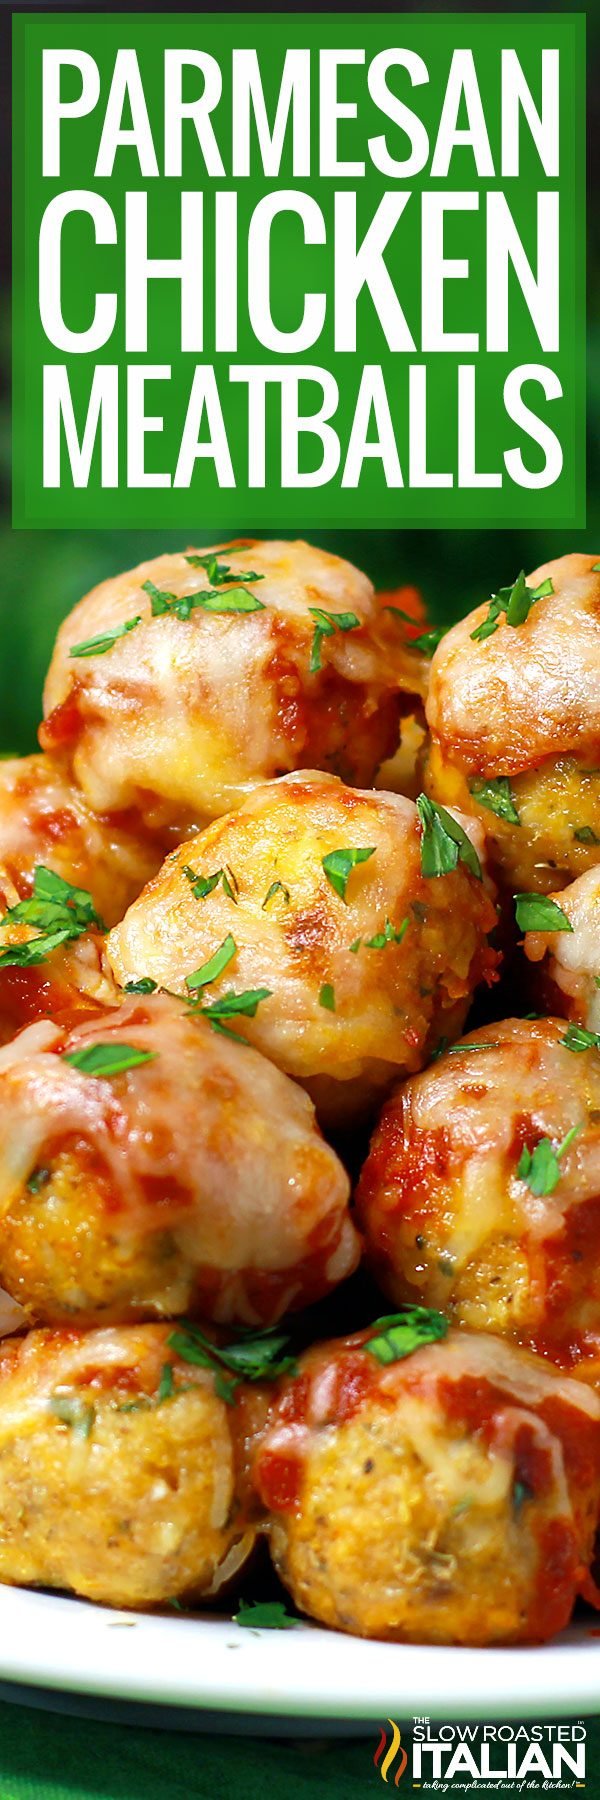 Title text (pictured in a stack): Parmesan Chicken Meatballs Recipe